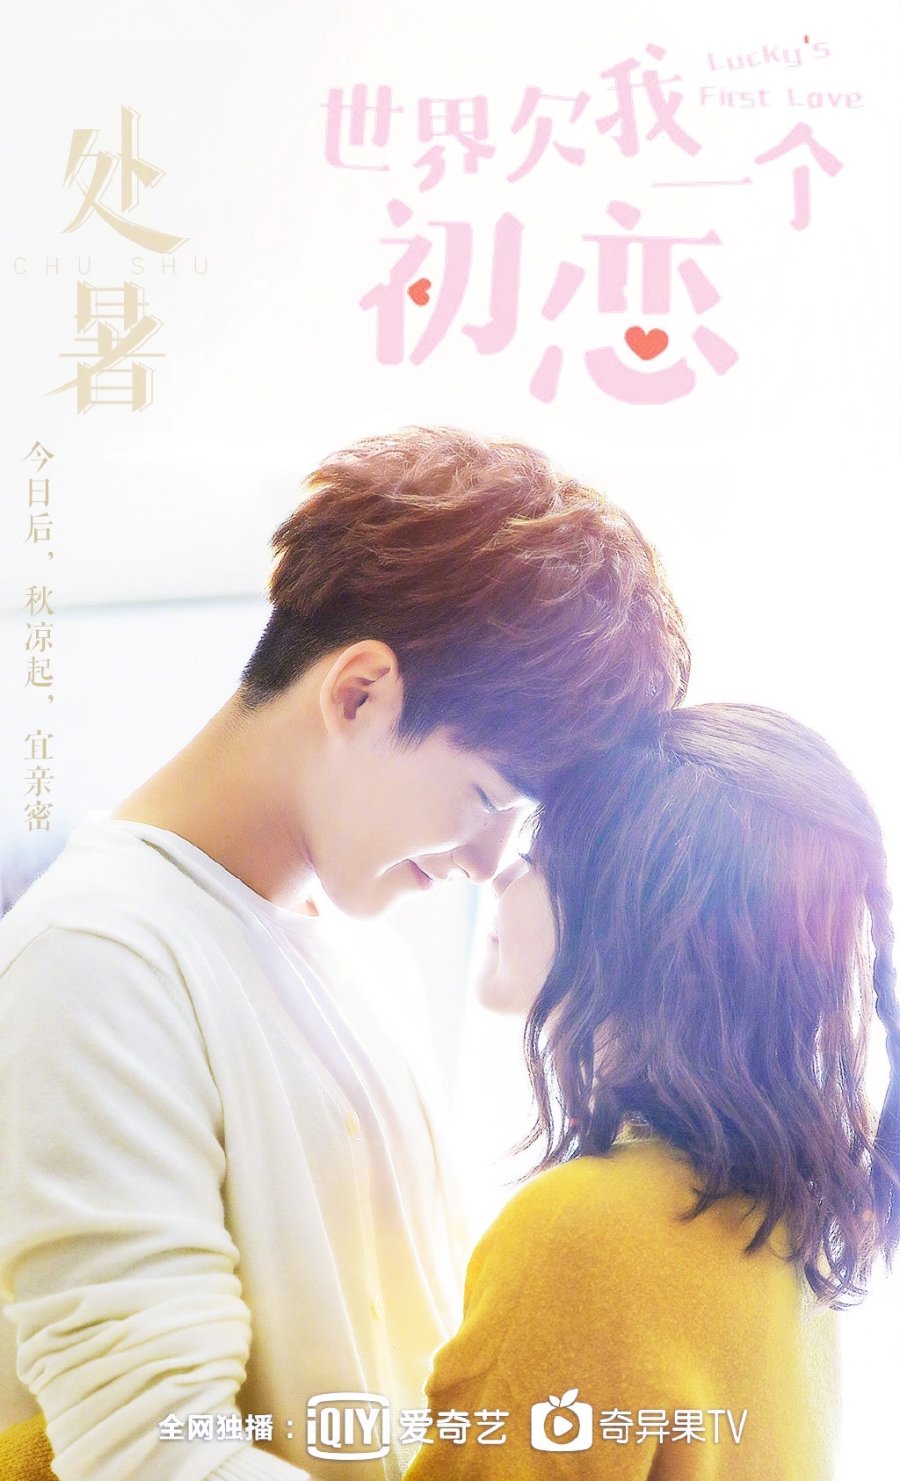 image poster from imdb - ​Lucky's First Love (2019)